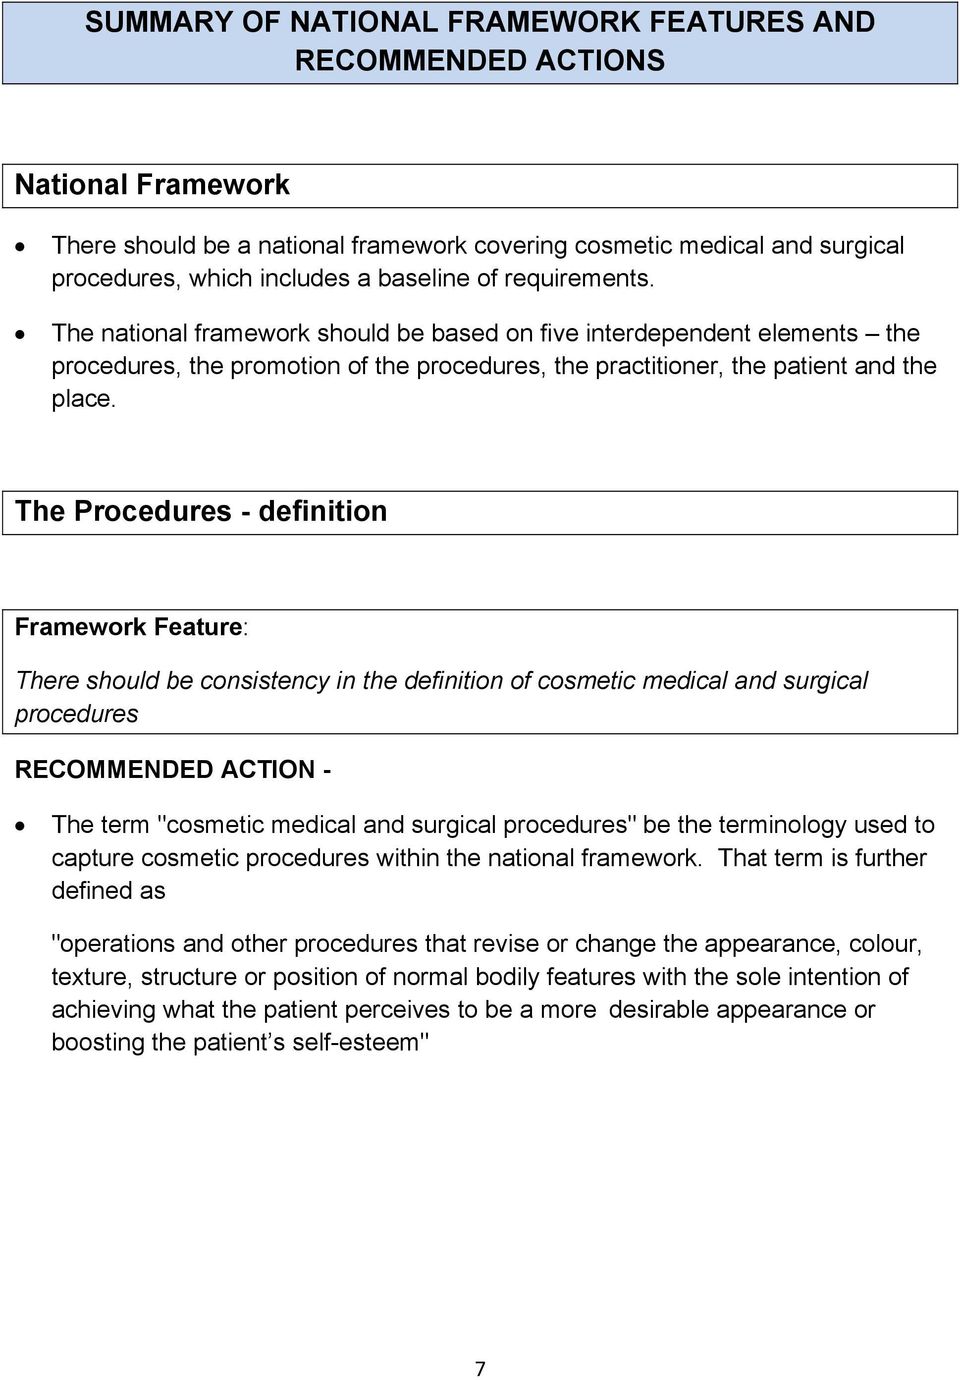 The Procedures - definition Framework Feature: There should be consistency in the definition of cosmetic medical and surgical procedures RECOMMENDED ACTION - The term "cosmetic medical and surgical